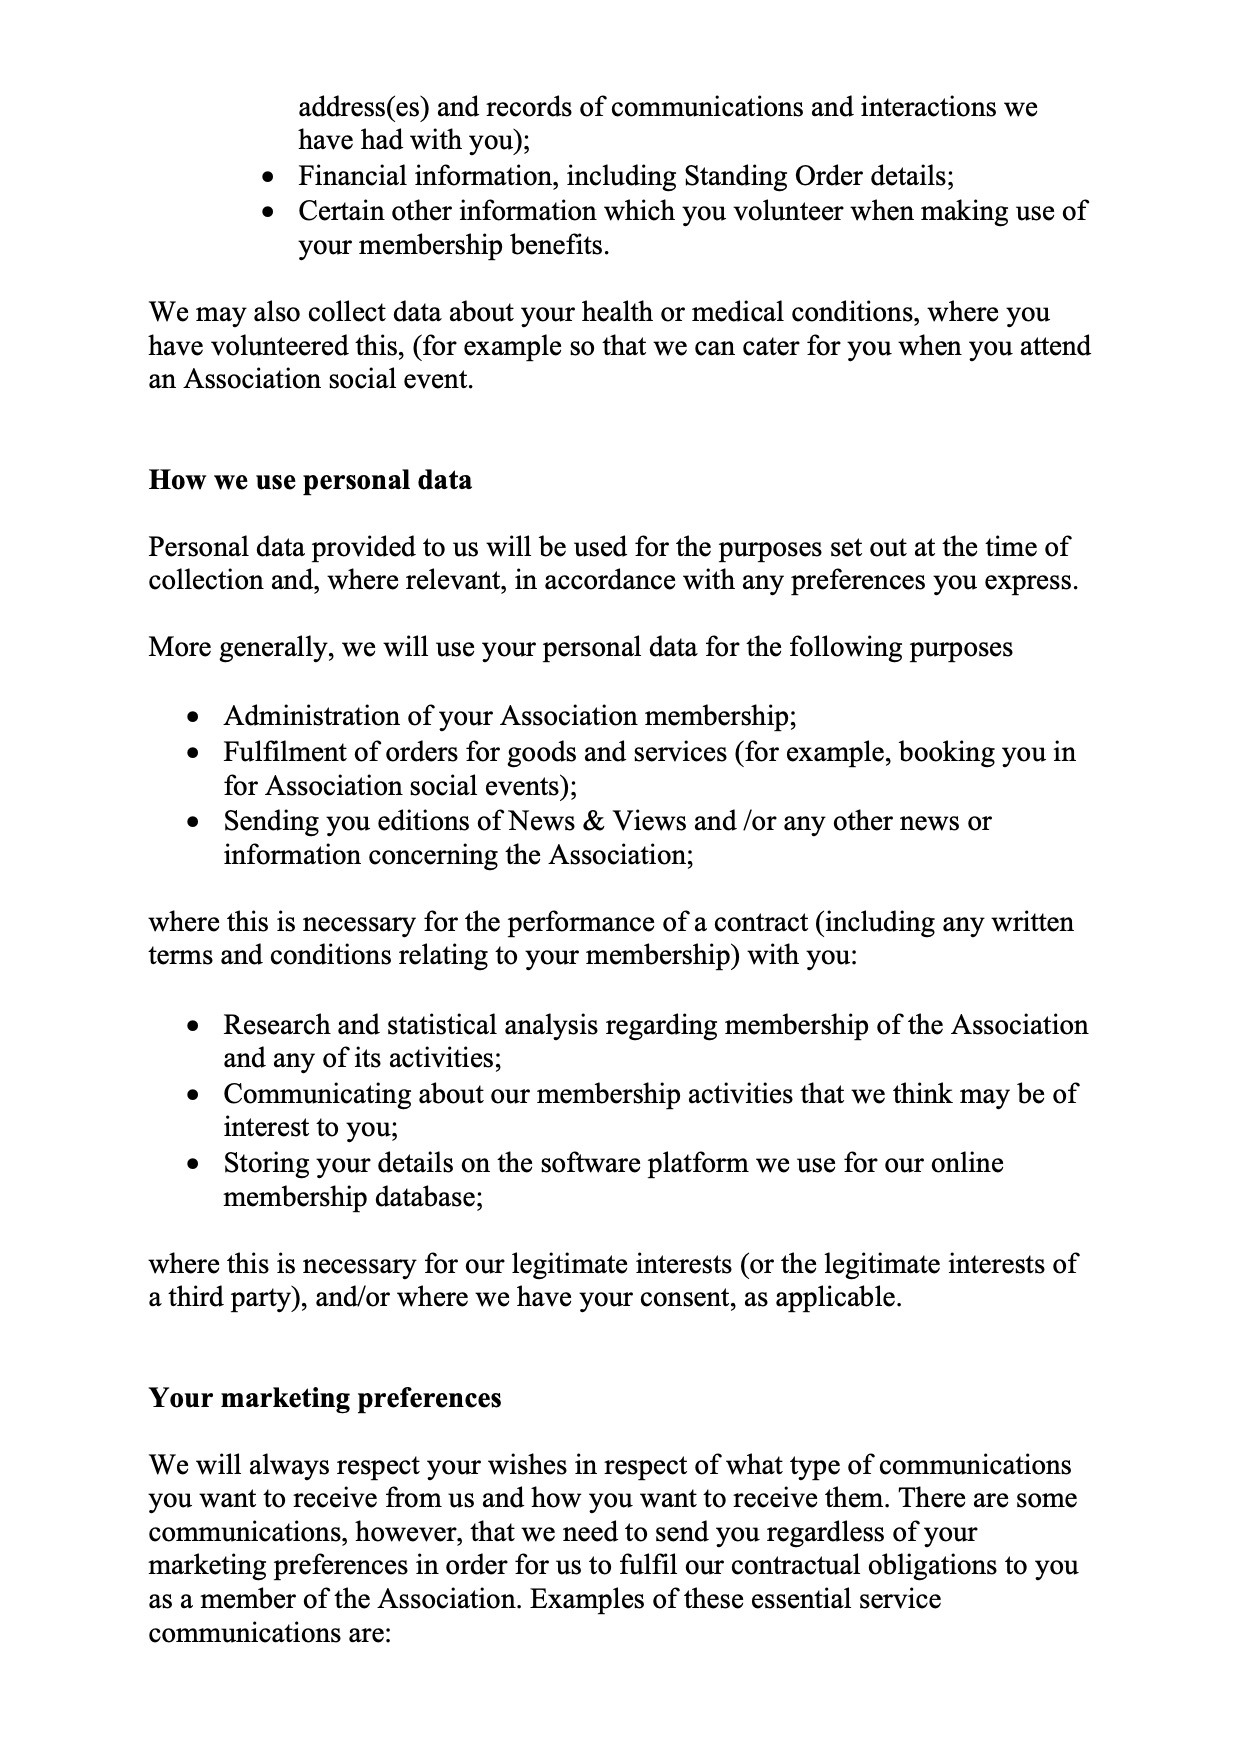 Privacy Policy Page 2